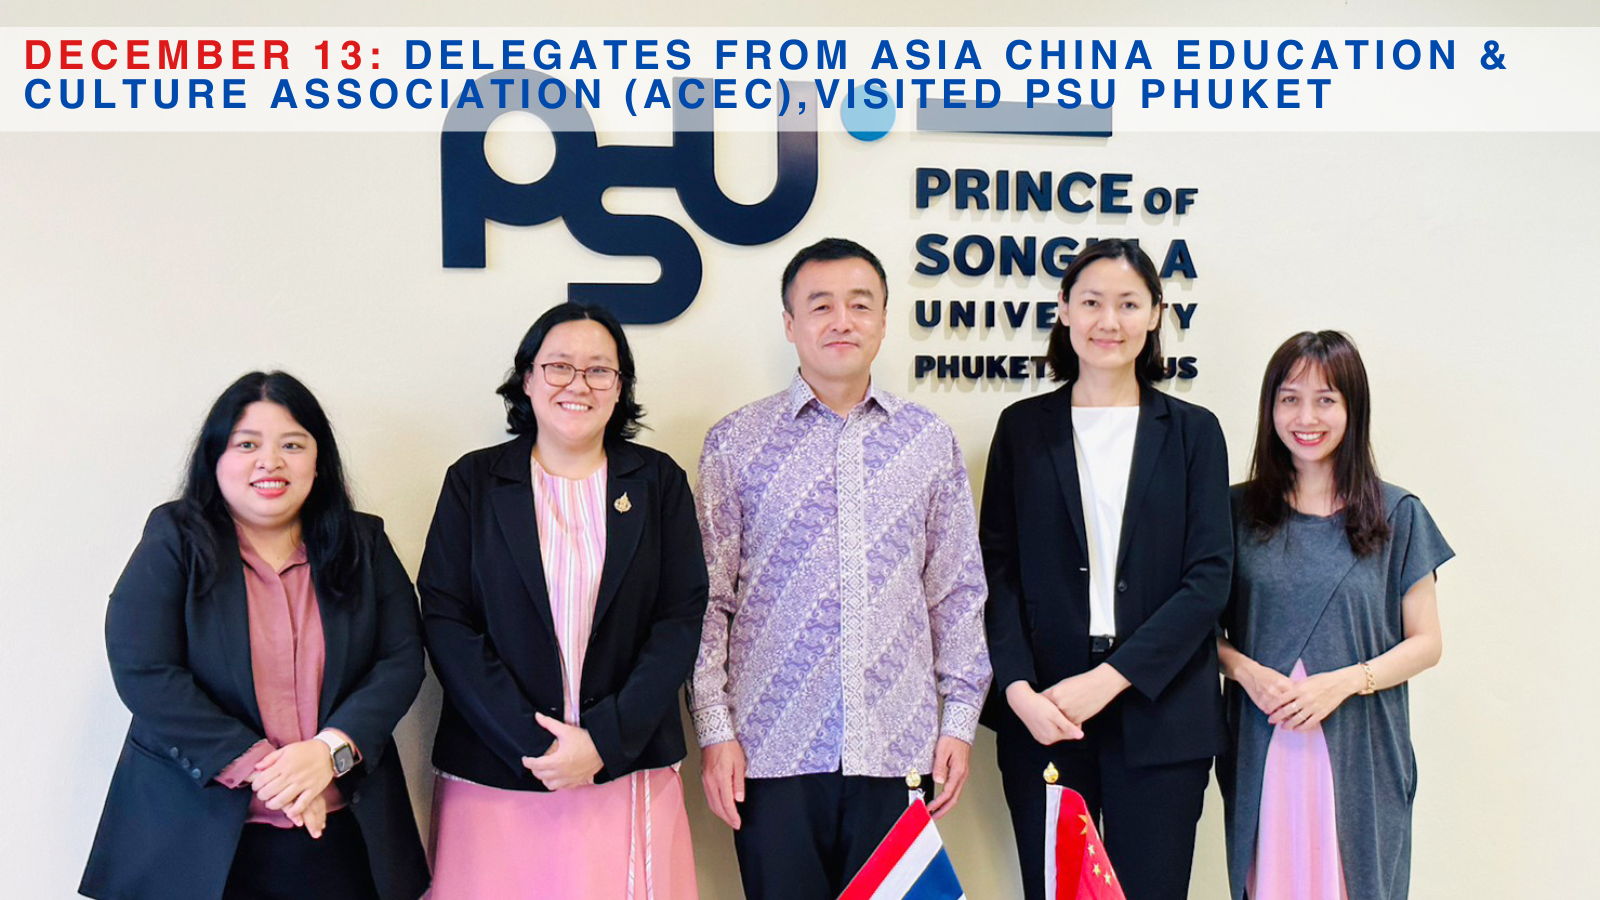 December 13: Delegates from Asia China Education & Culture Association (ACEC) Visited PSU Phuket